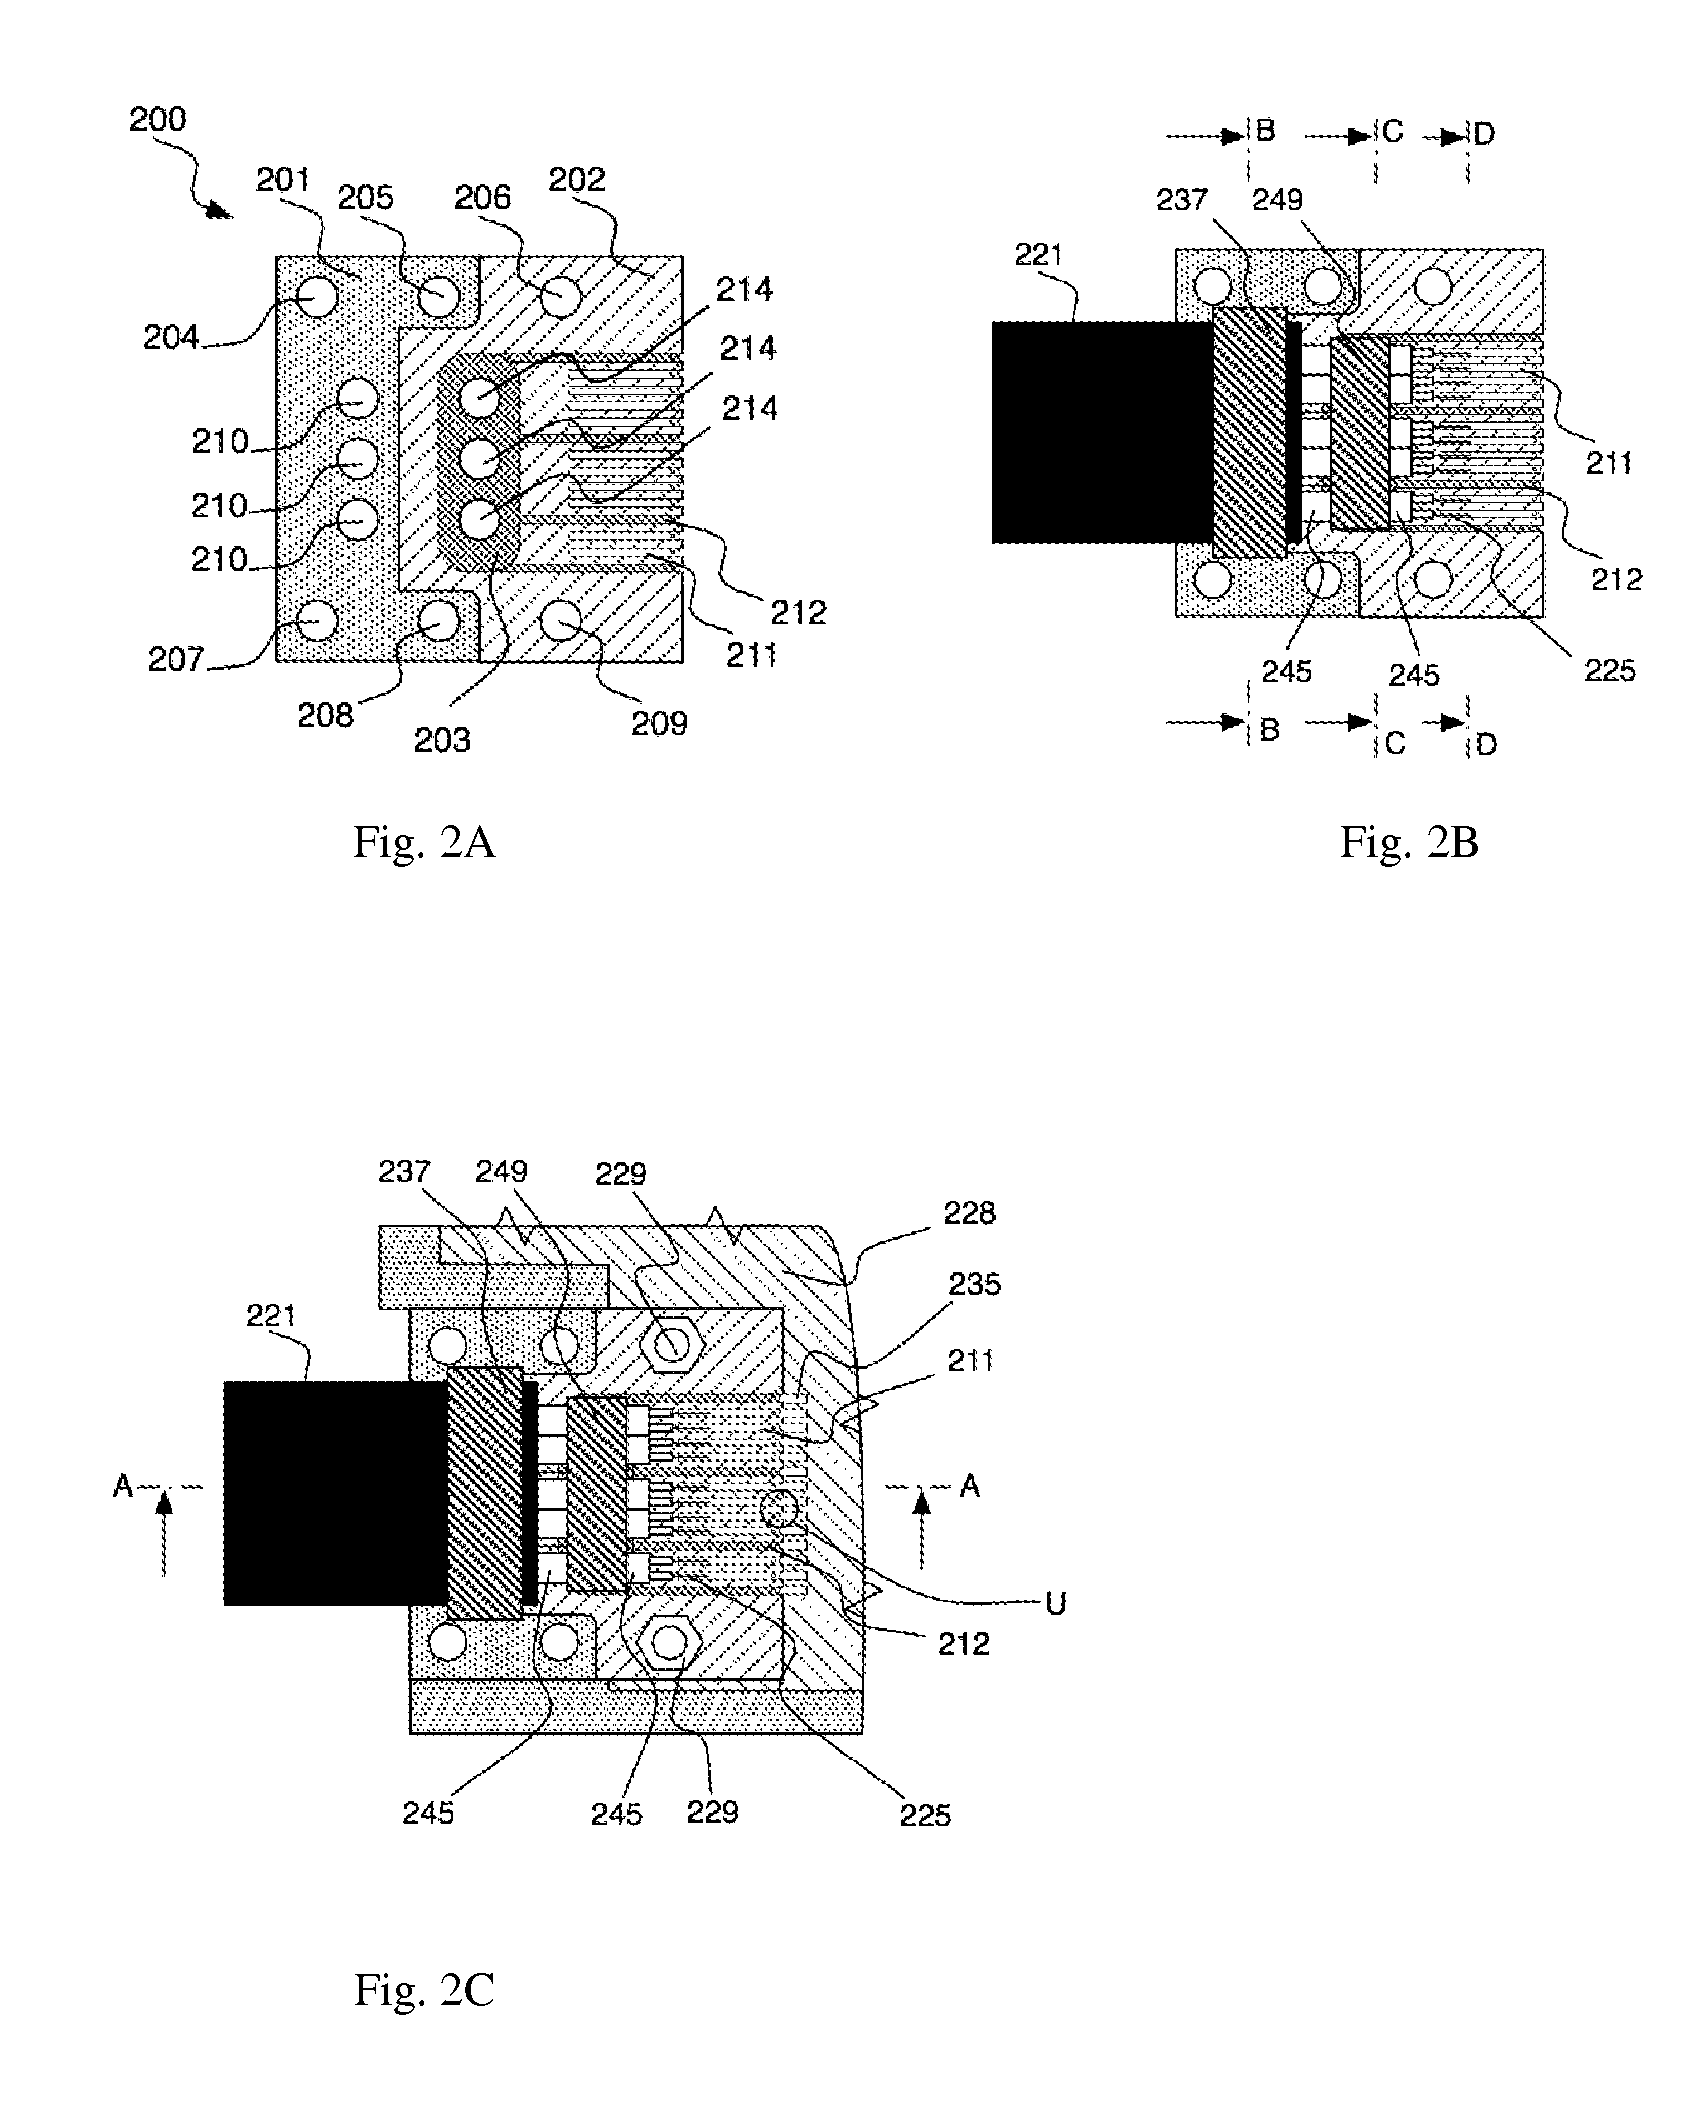 Electrical connection between cable and printed circuit board for high data speed and high signal frequency